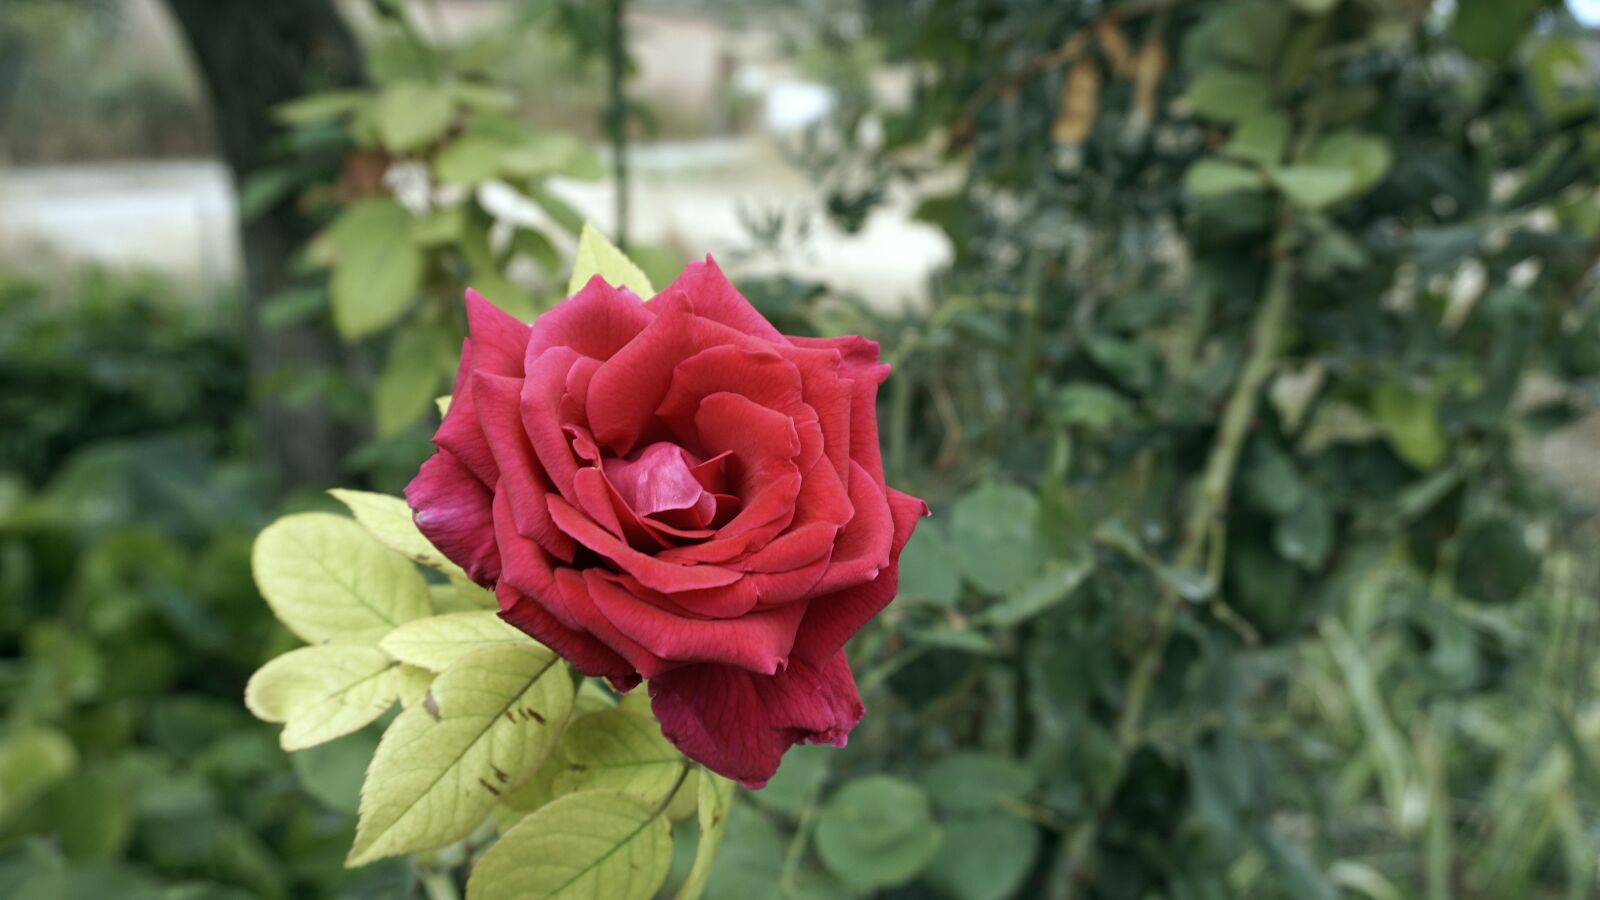 Sony a6000 sample photo. Flower, rosa, red rose photography